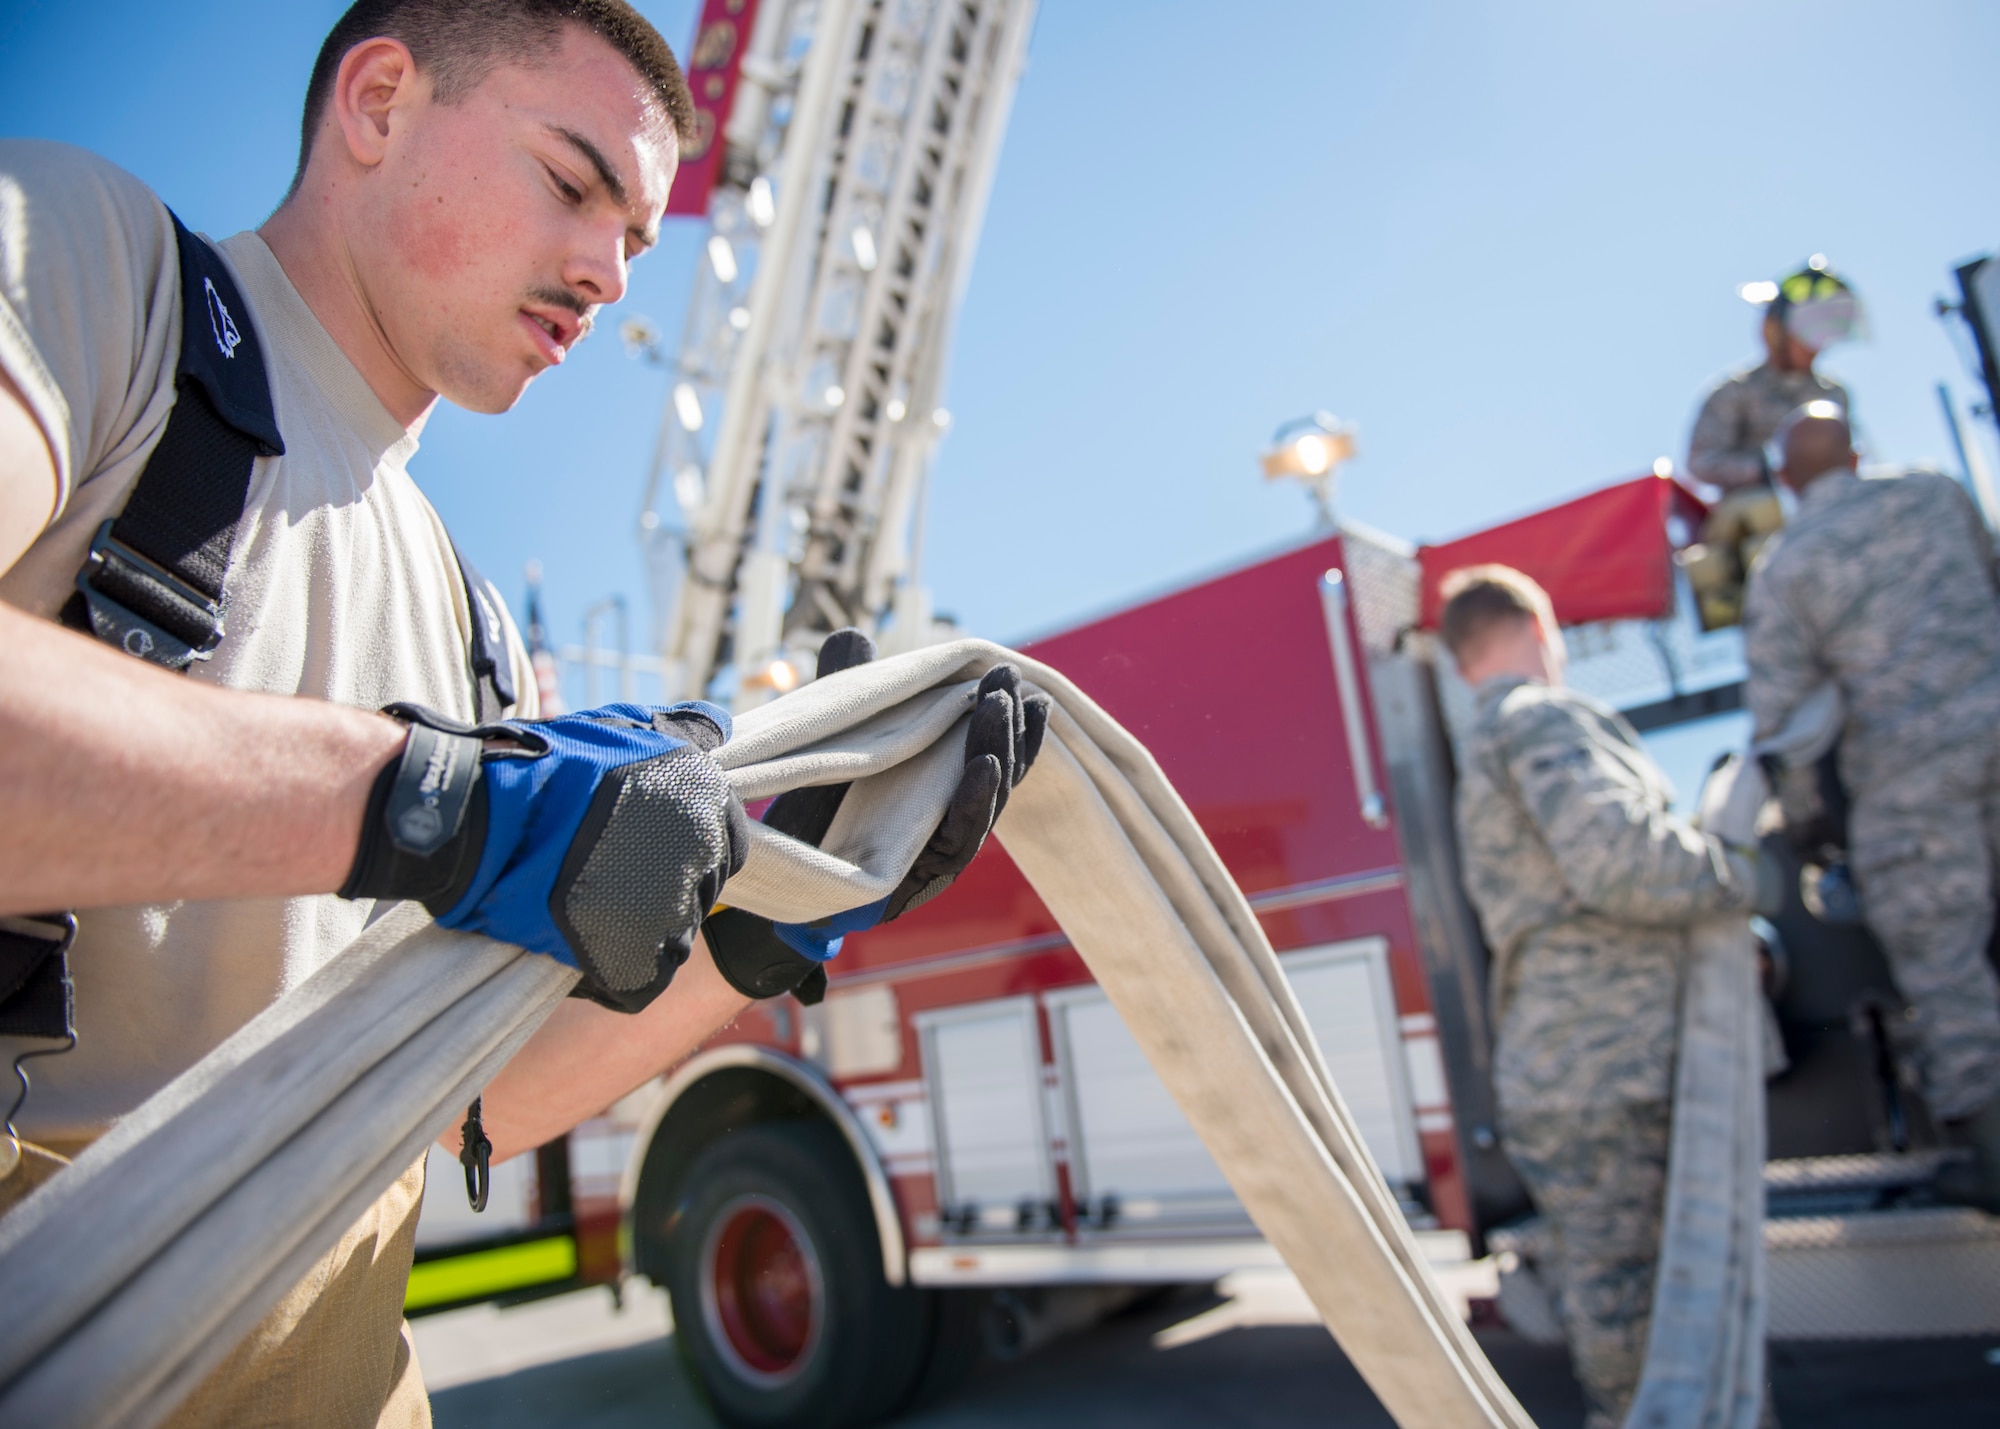 Airman Bryce Foslien, a 49th Civil Engineering Squadron fire protection specialist, helps roll up a hose during an exercise Feb. 9, at Holloman Air Force Base, N.M. These Airmen firefighters train year-round to remain prepared for when they are called upon. (U.S. Air Force photo by Airman 1st Class Randahl J. Jenson)